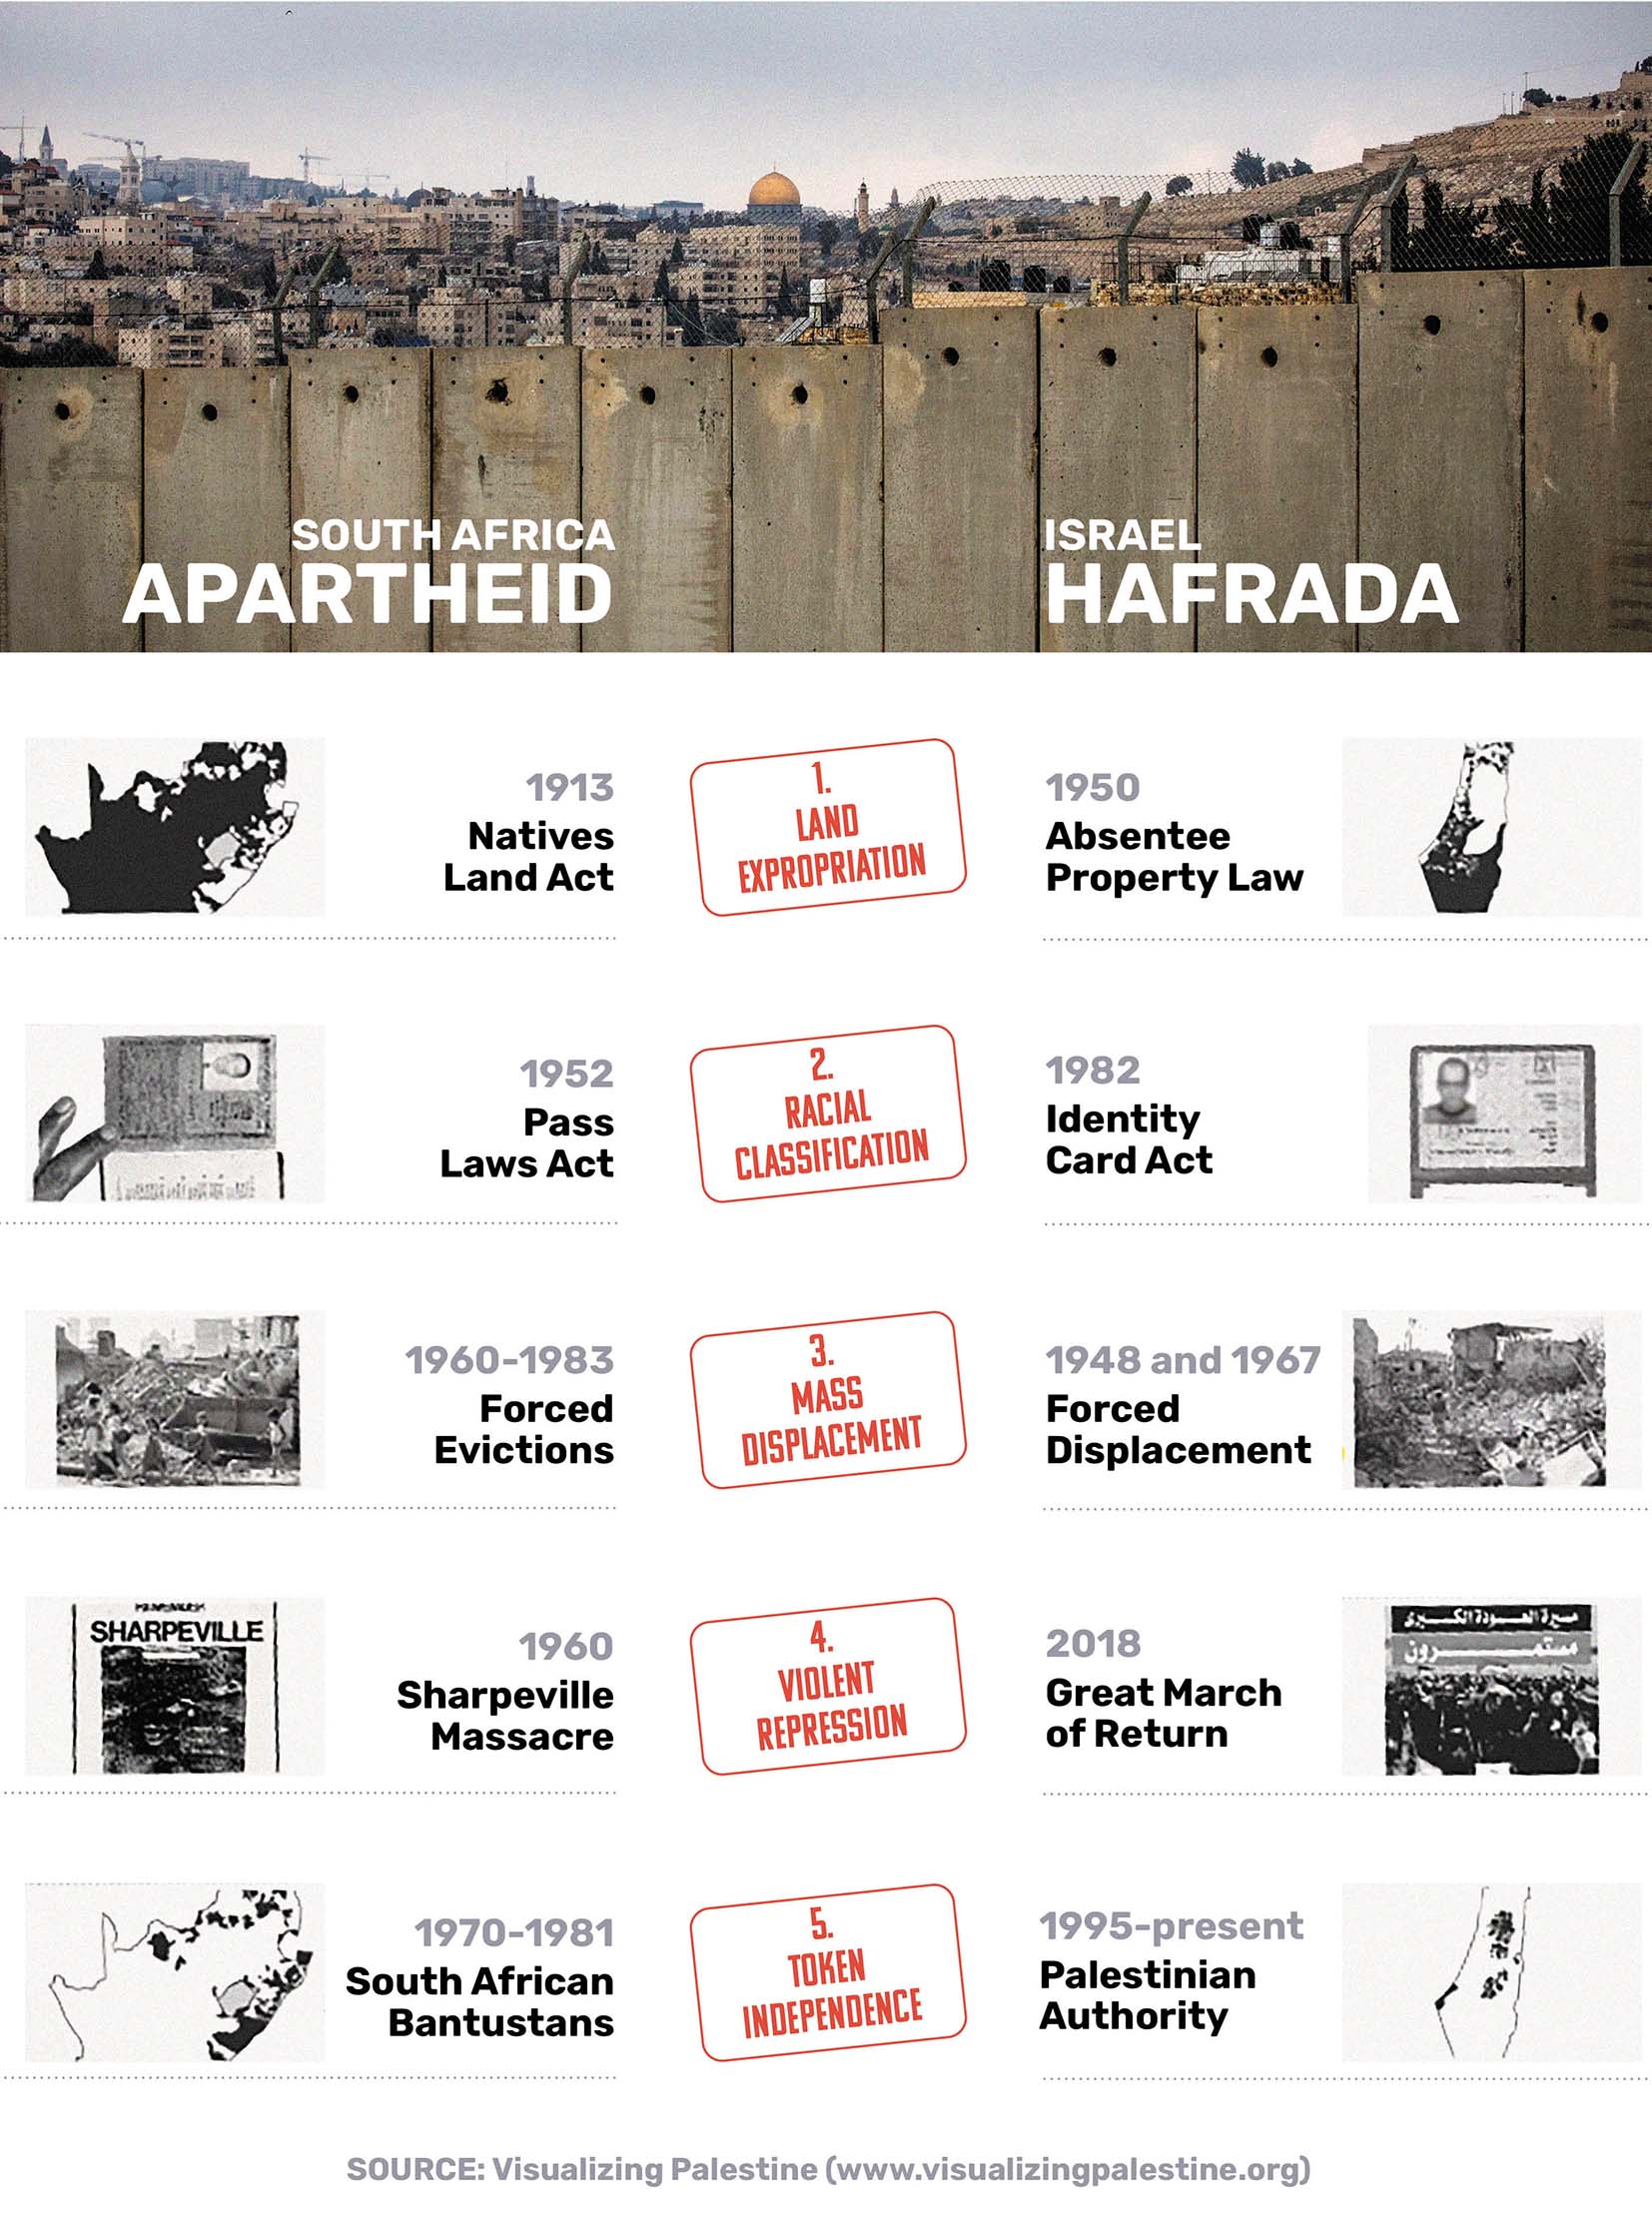 Infographic comparing apartheid in South Africa and in Israel